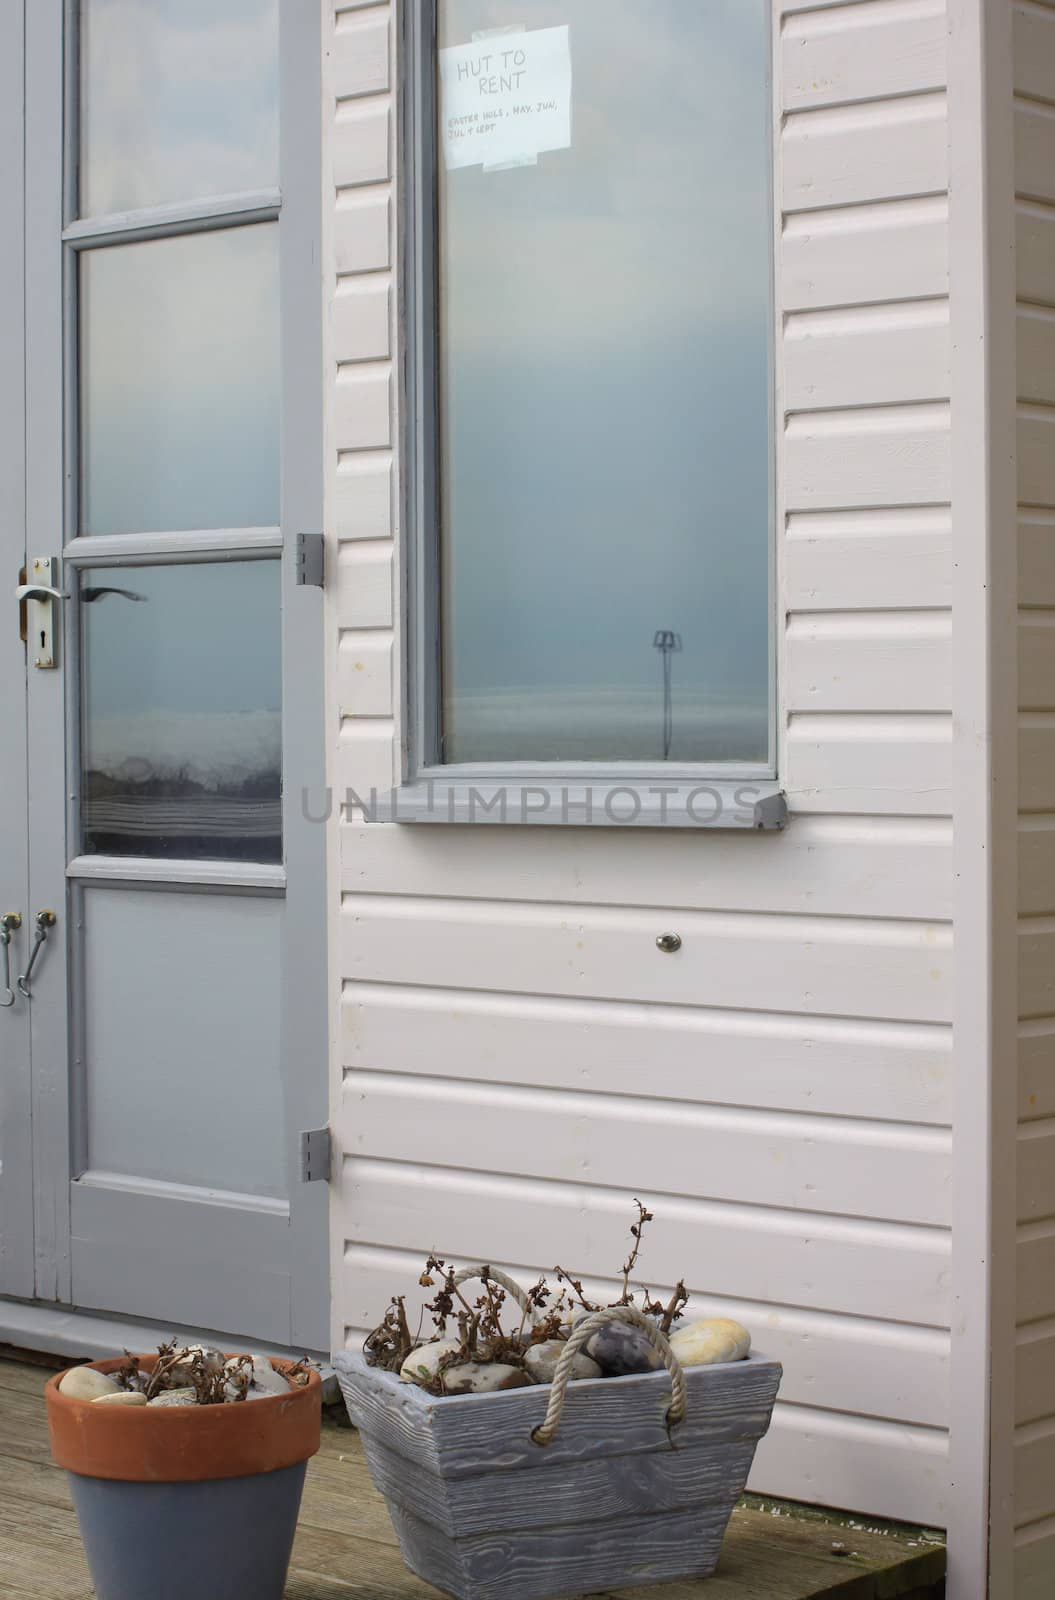 A wooden beach hut with a sign in the window advertising its availablity to be rented. Located in Christchurch, Dorset Hampshire UK.